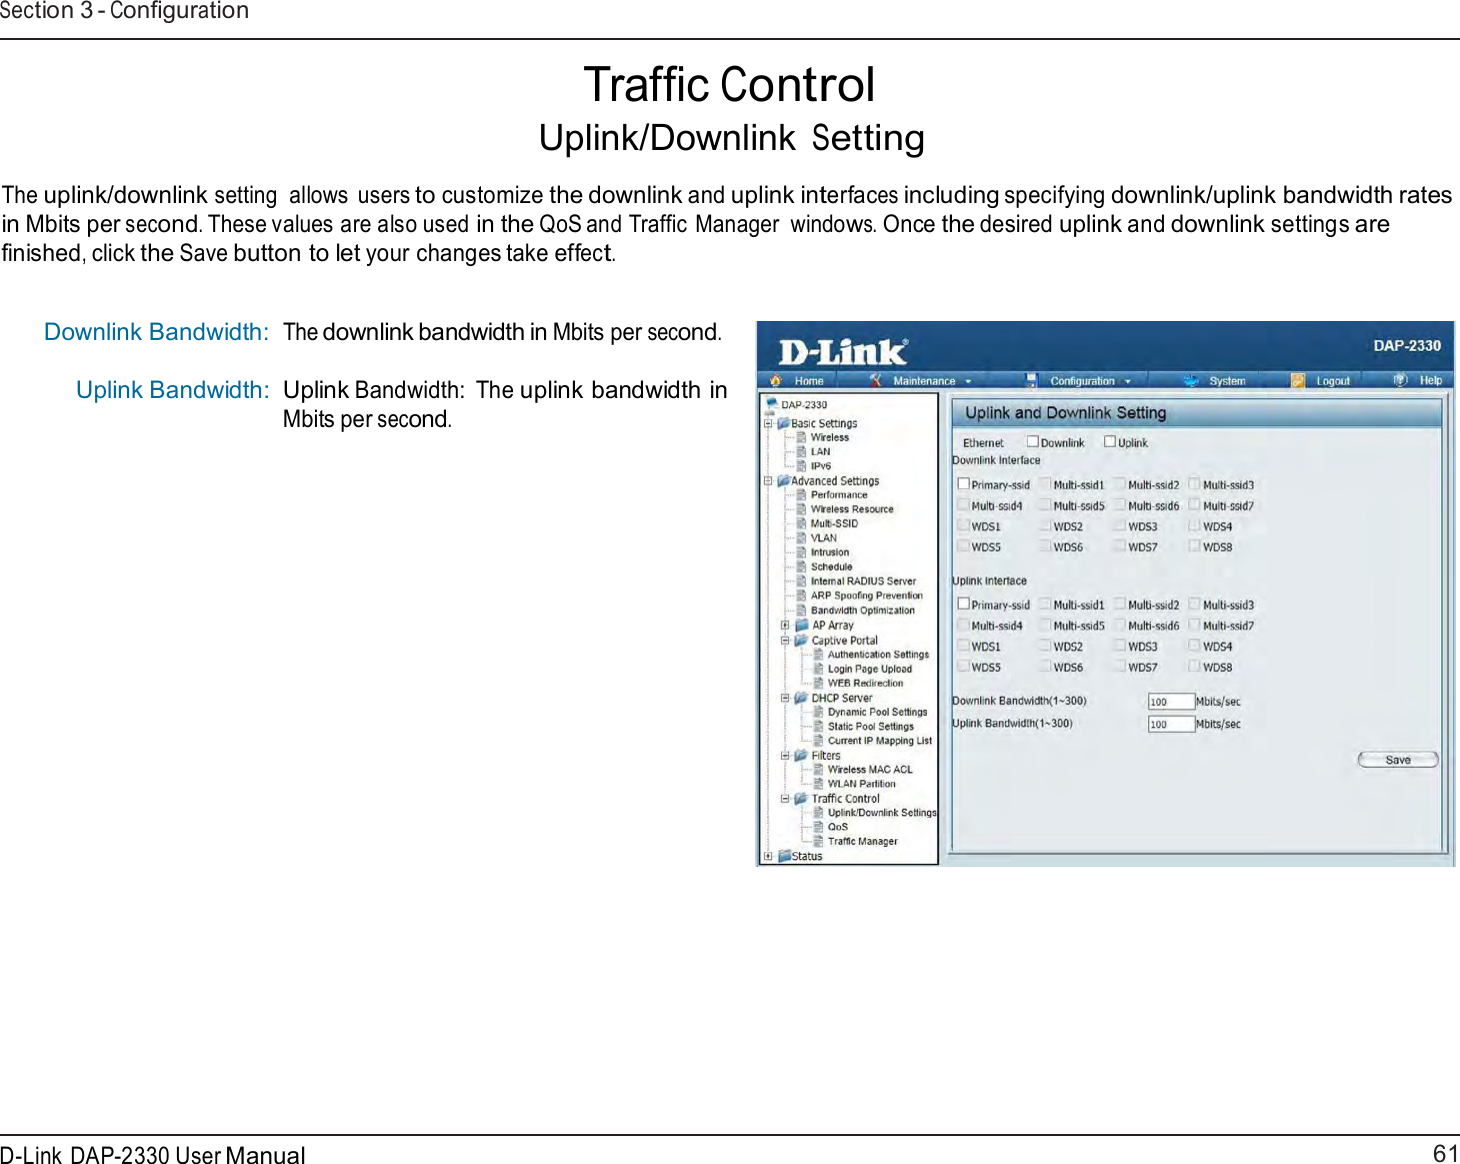 61 D-Link DAP-2330 User ManualSection 3 - Configuration      Traffic Control Uplink/Downlink Setting  The uplink/downlink setting  allows users to customize the downlink and uplink interfaces including specifying downlink/uplink bandwidth rates in Mbits per second. These values are also used in the QoS and Traffic Manager  windows. Once the desired uplink and downlink settings are finished, click the Save button to let your changes take effect.   Downlink Bandwidth: Uplink Bandwidth: The downlink bandwidth in Mbits per second.   Uplink Bandwidth:  The uplink bandwidth in Mbits per second. 